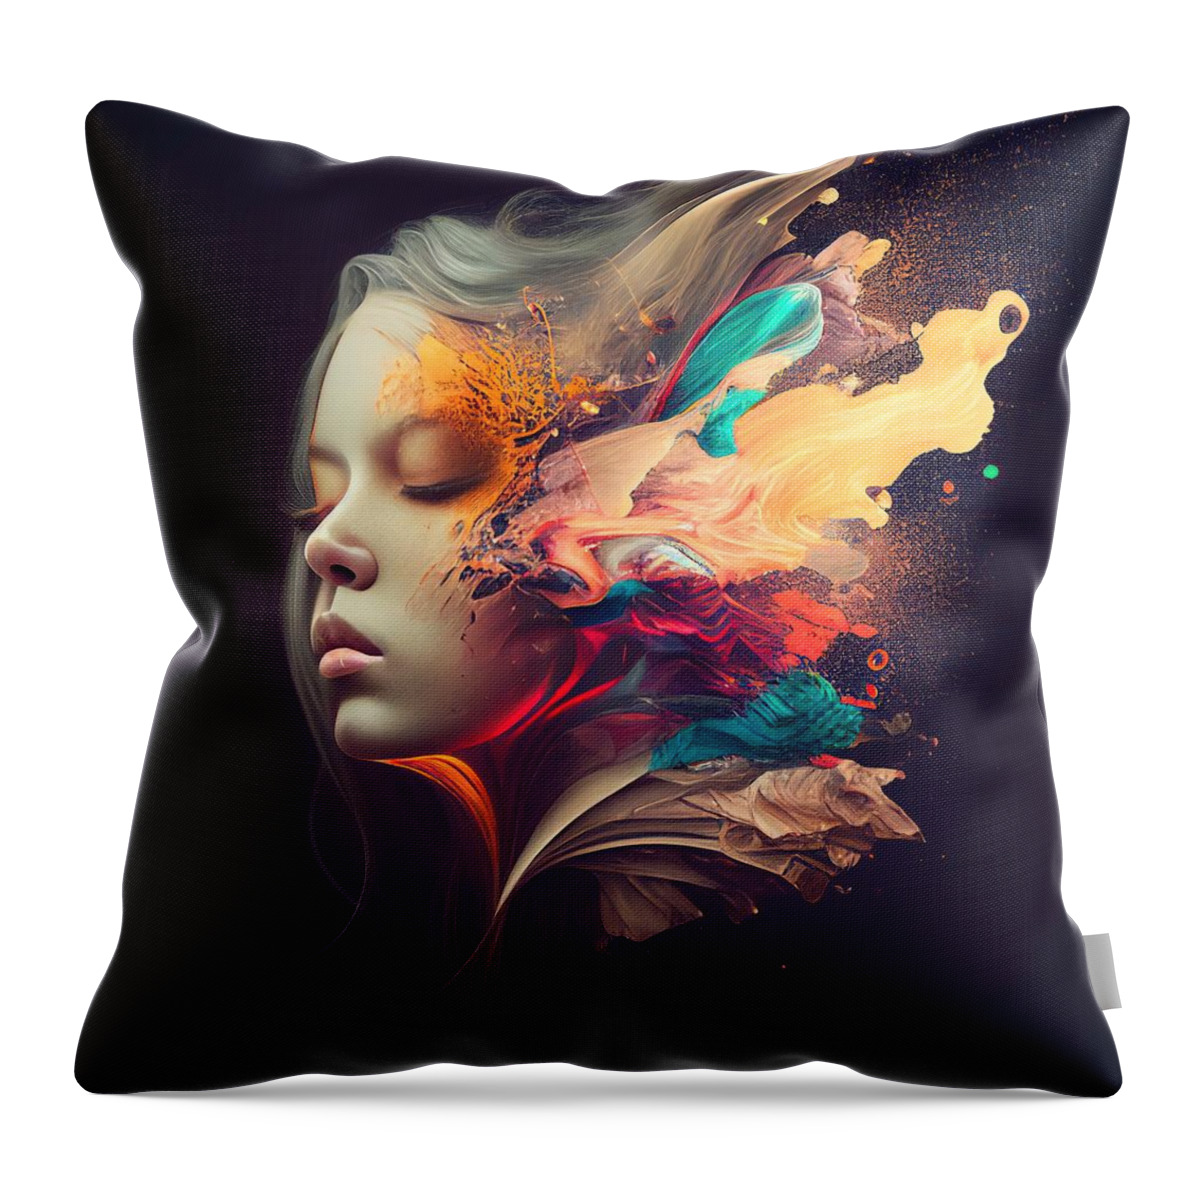 Wonderful Throw Pillow featuring the digital art Wonderful Thoughts by My Head Cinema